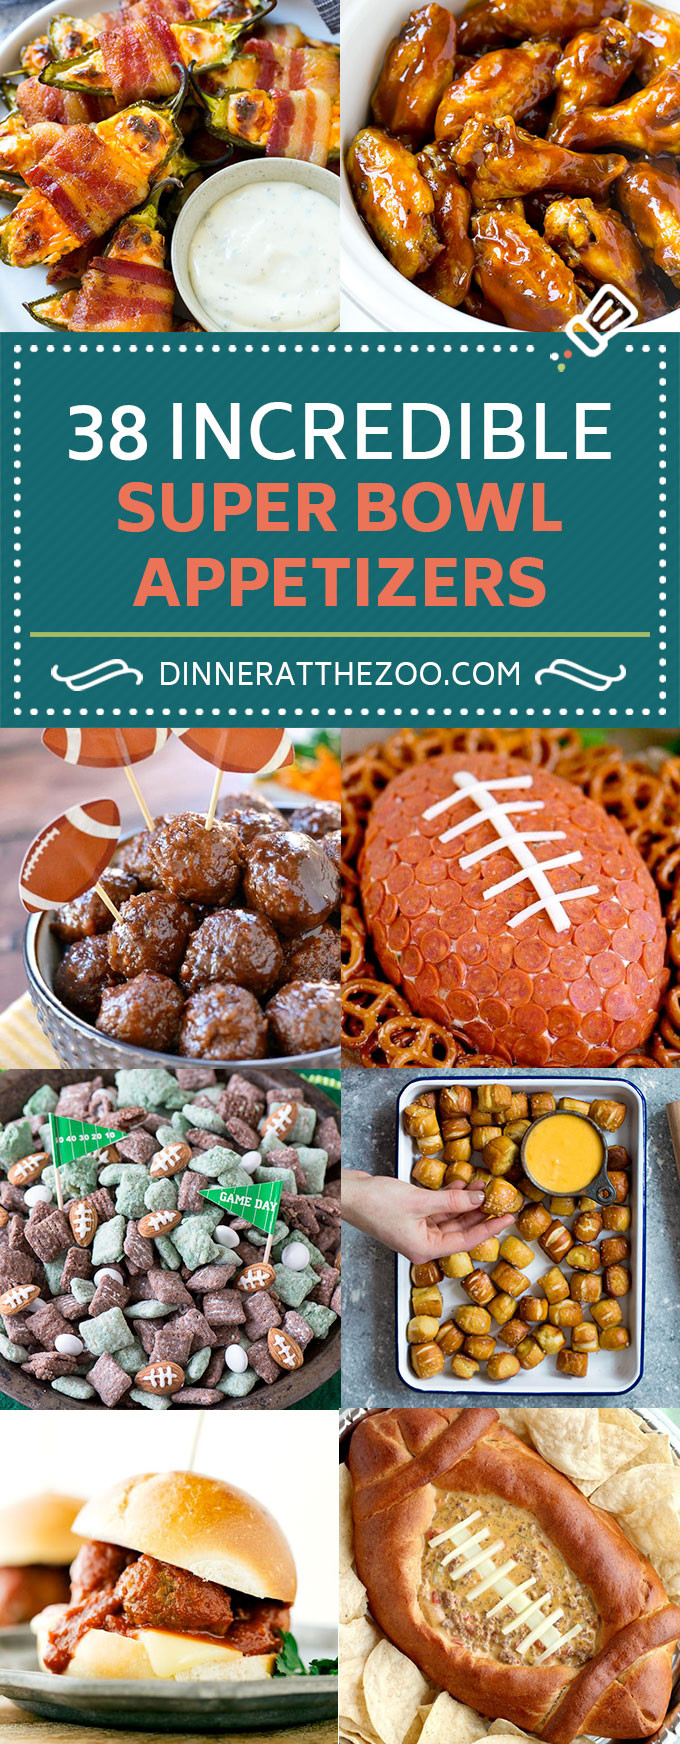 Great Super Bowl Recipes
 45 Incredible Super Bowl Appetizer Recipes Dinner at the Zoo